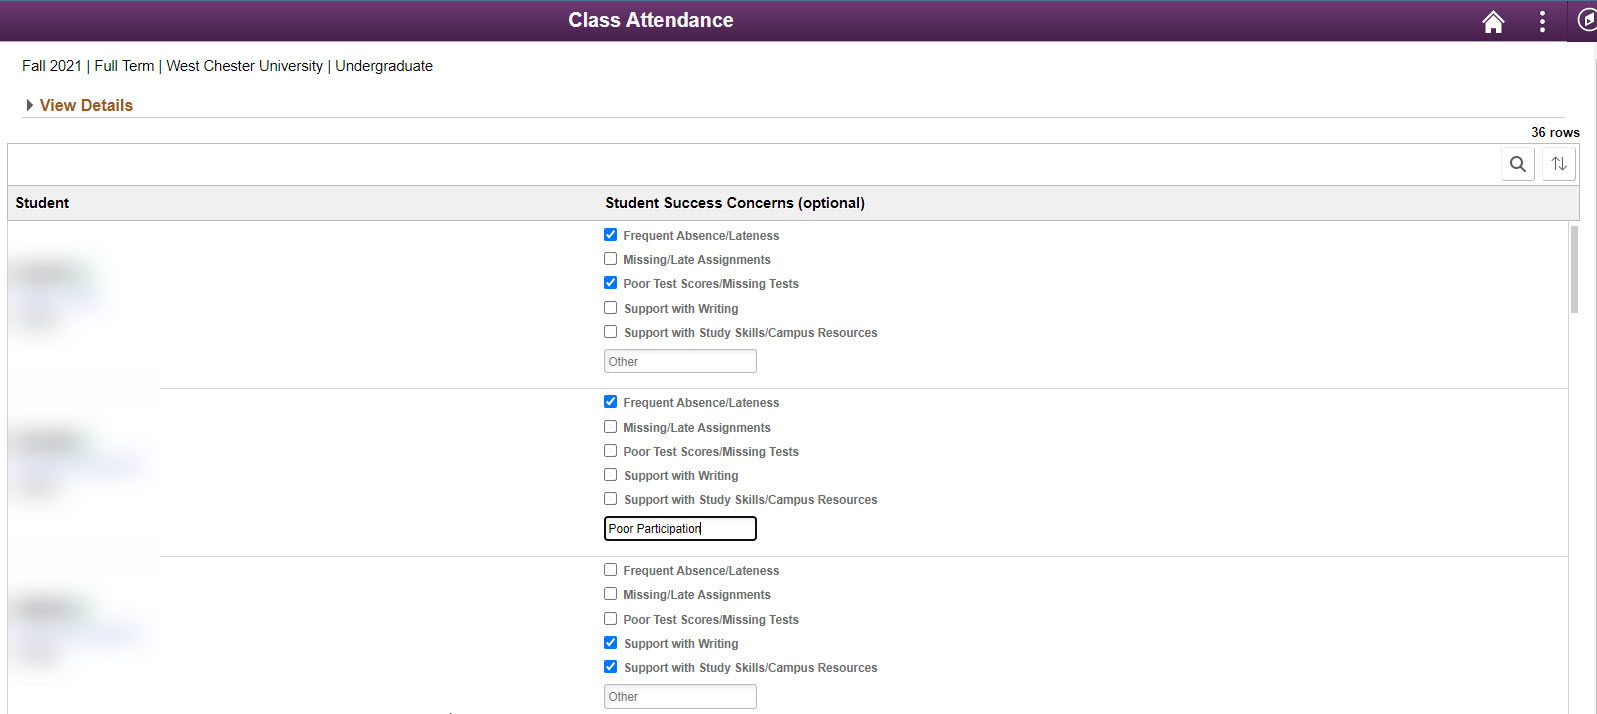 Screenshot showing student success concerns such as: attendance, assignments, tests, and support.